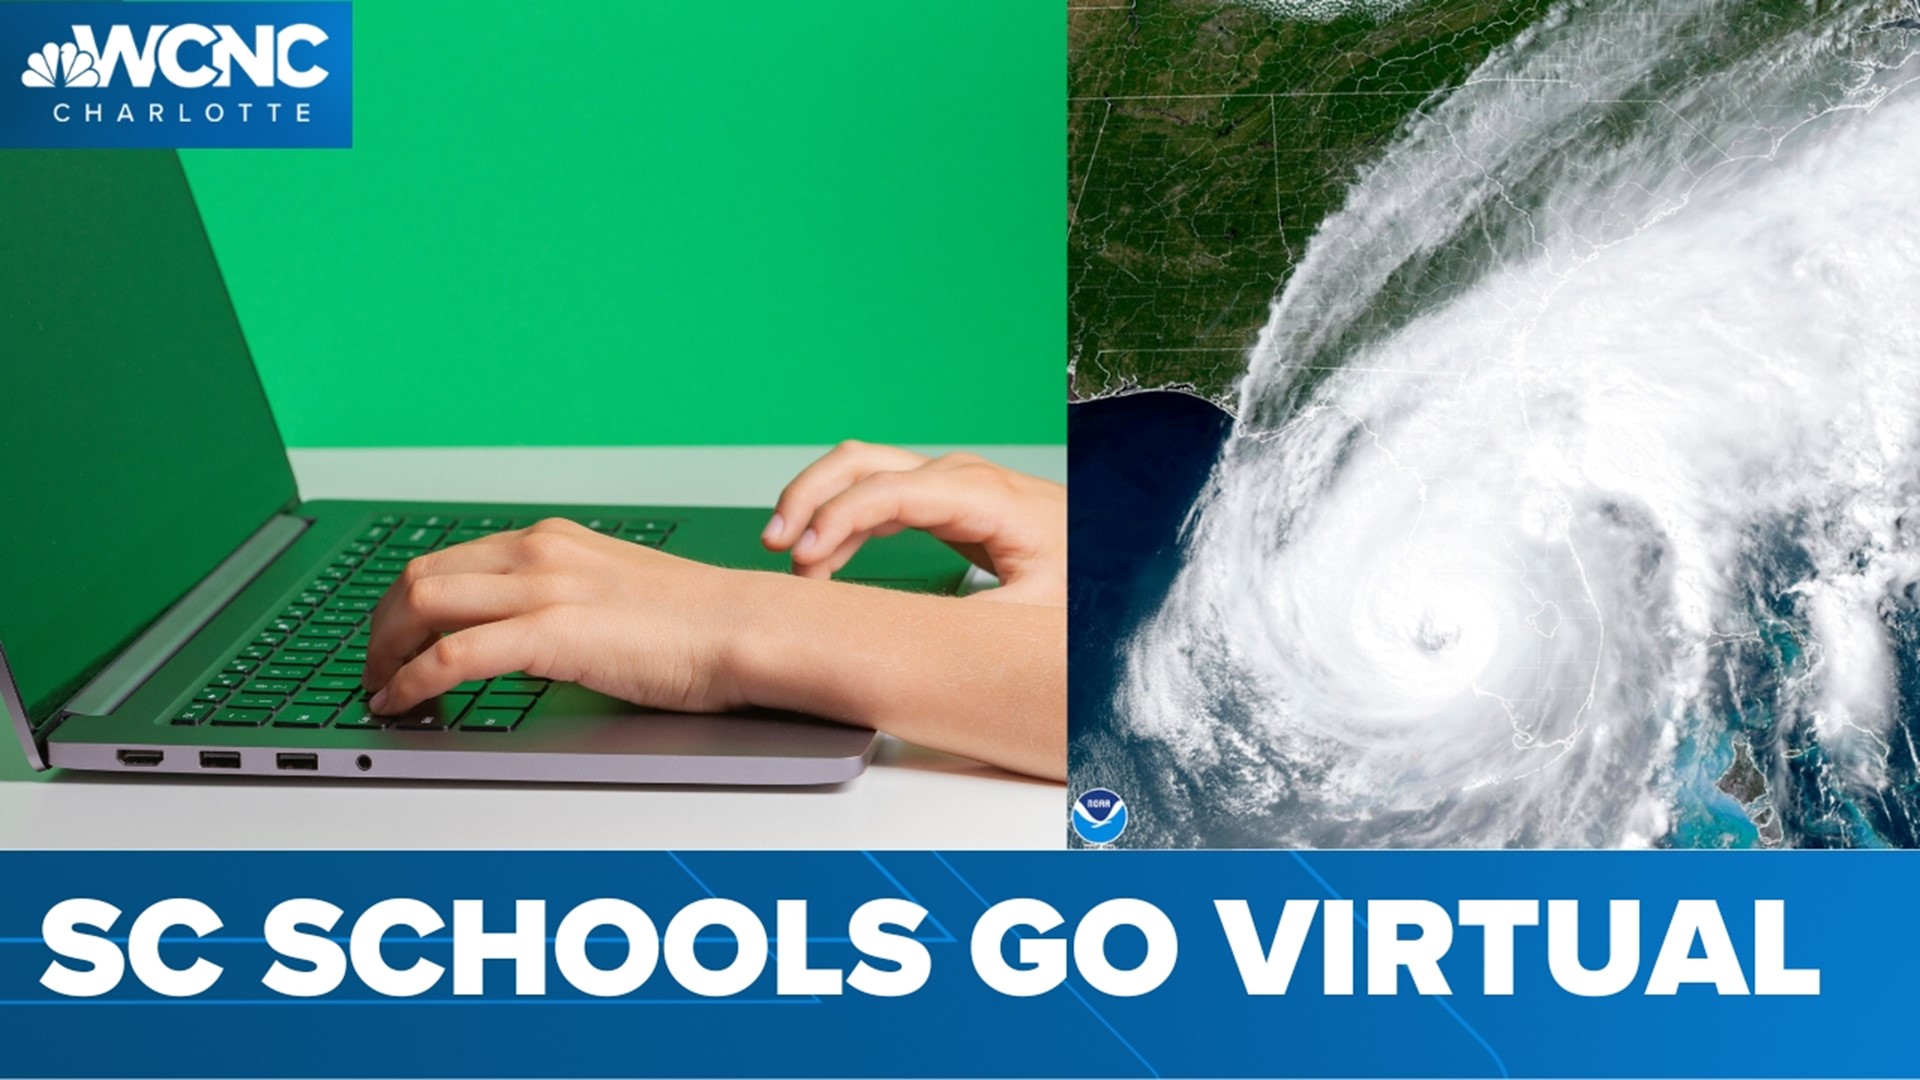 Because of these conditions, several school districts in our South Carolina counties are opting for virtual learning